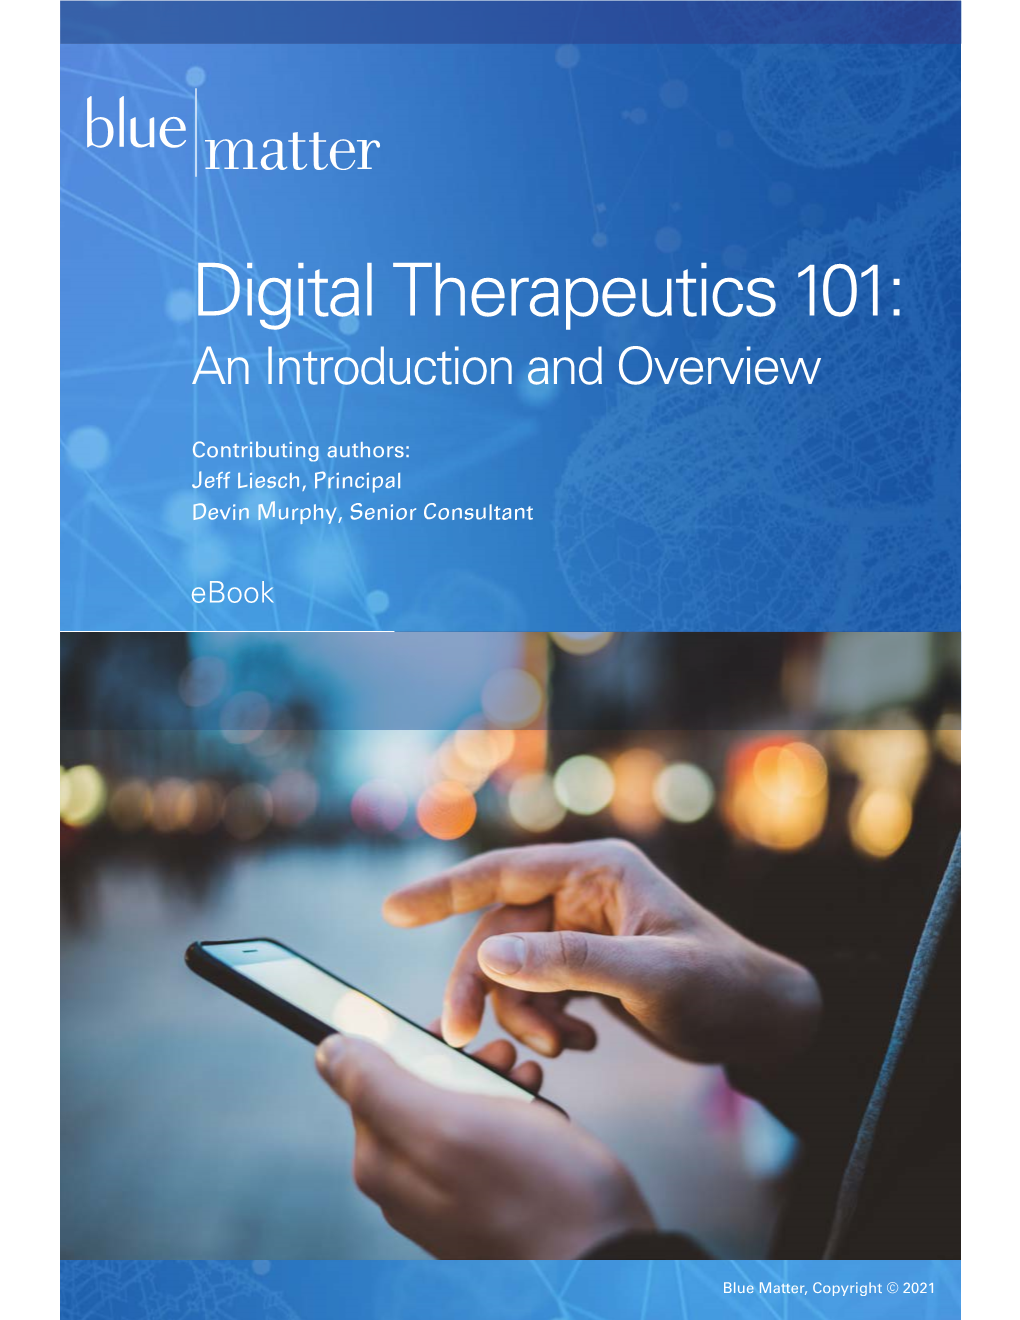 Digital Therapeutics 101: an Introduction and Overview